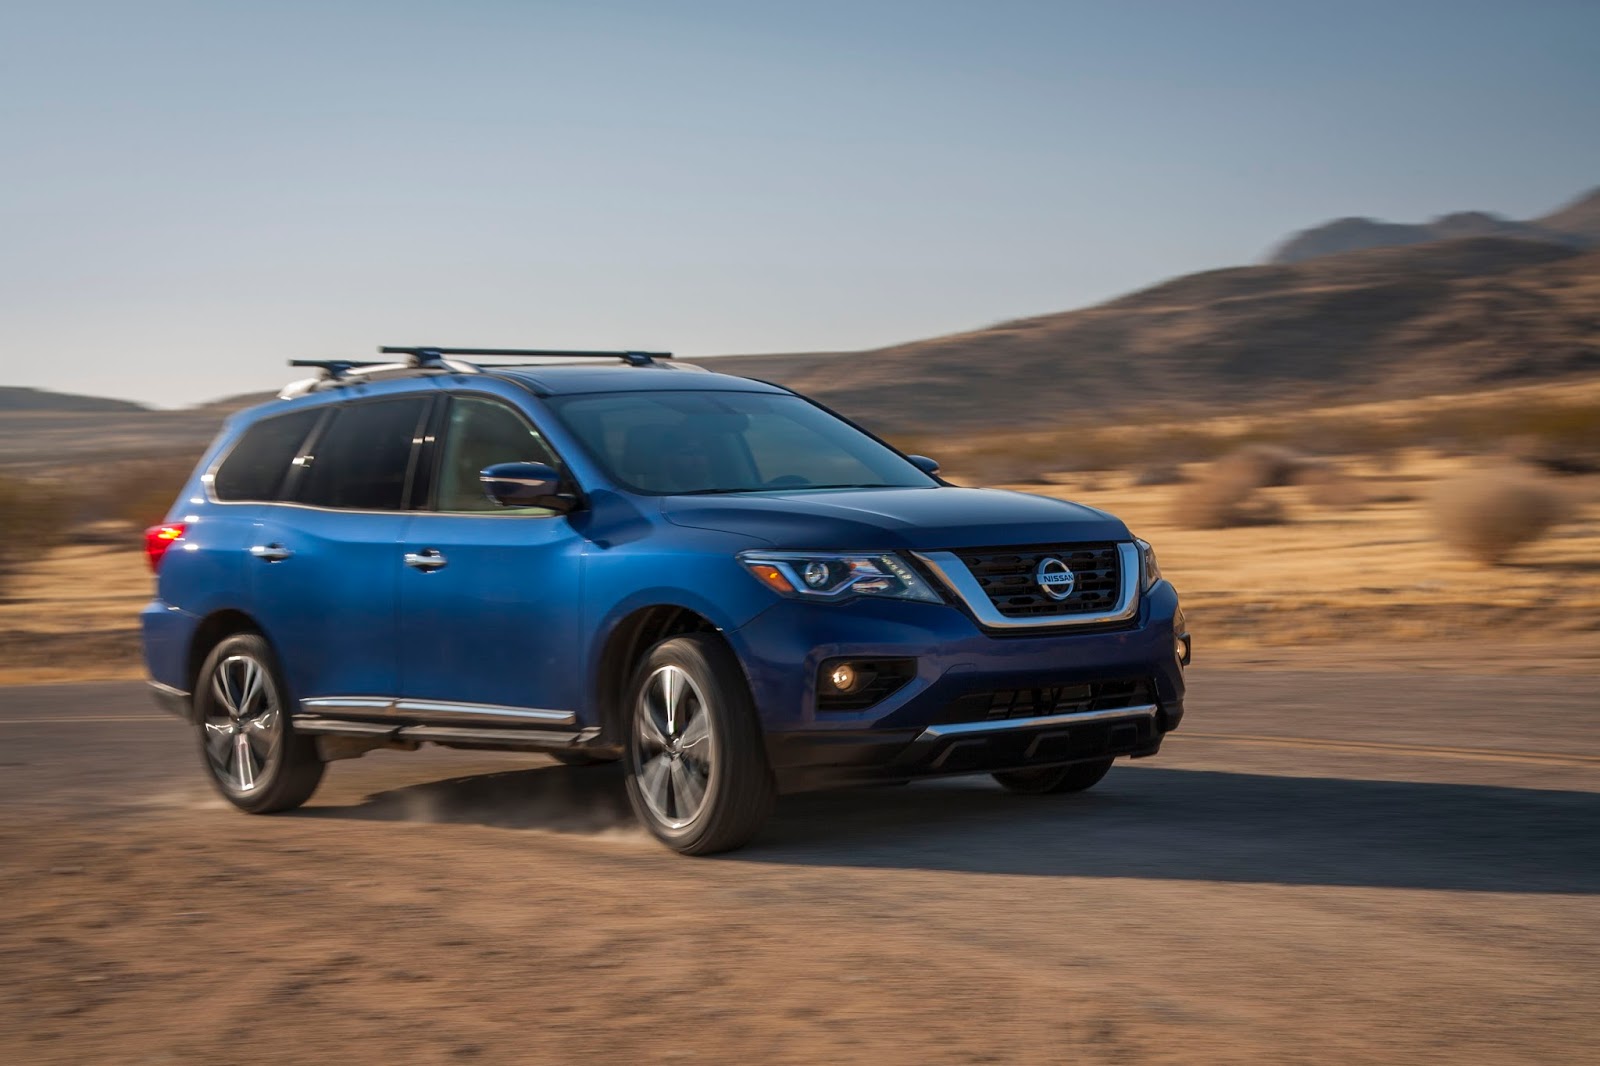 Path Found, Now For The Refinements: The 2017 Nissan Pathfinder